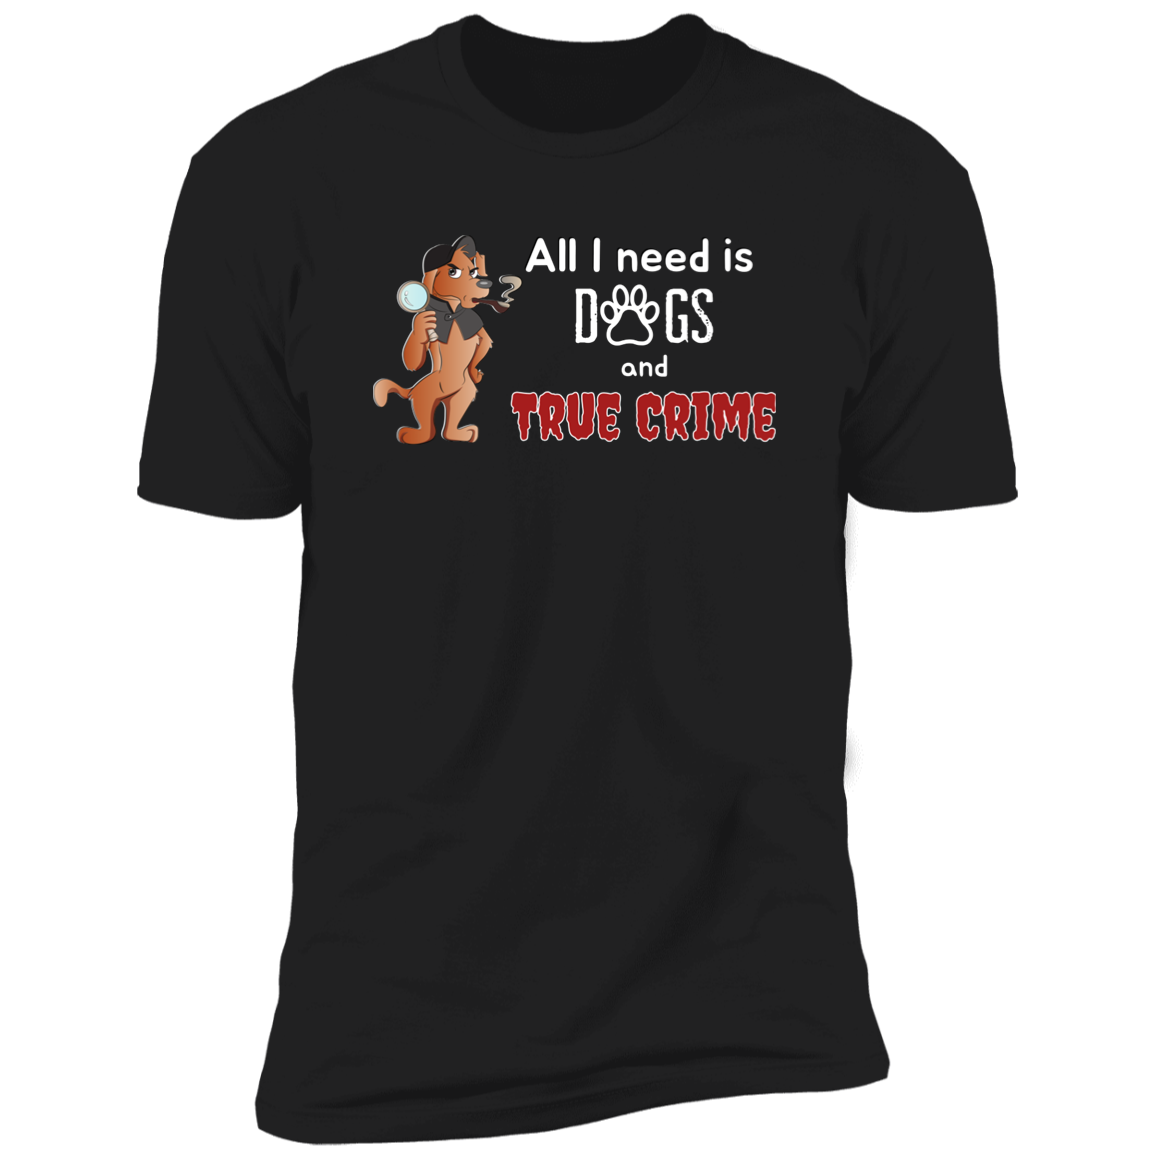 All I Need is Dogs and True Crime, Dog shirt for humas, in black